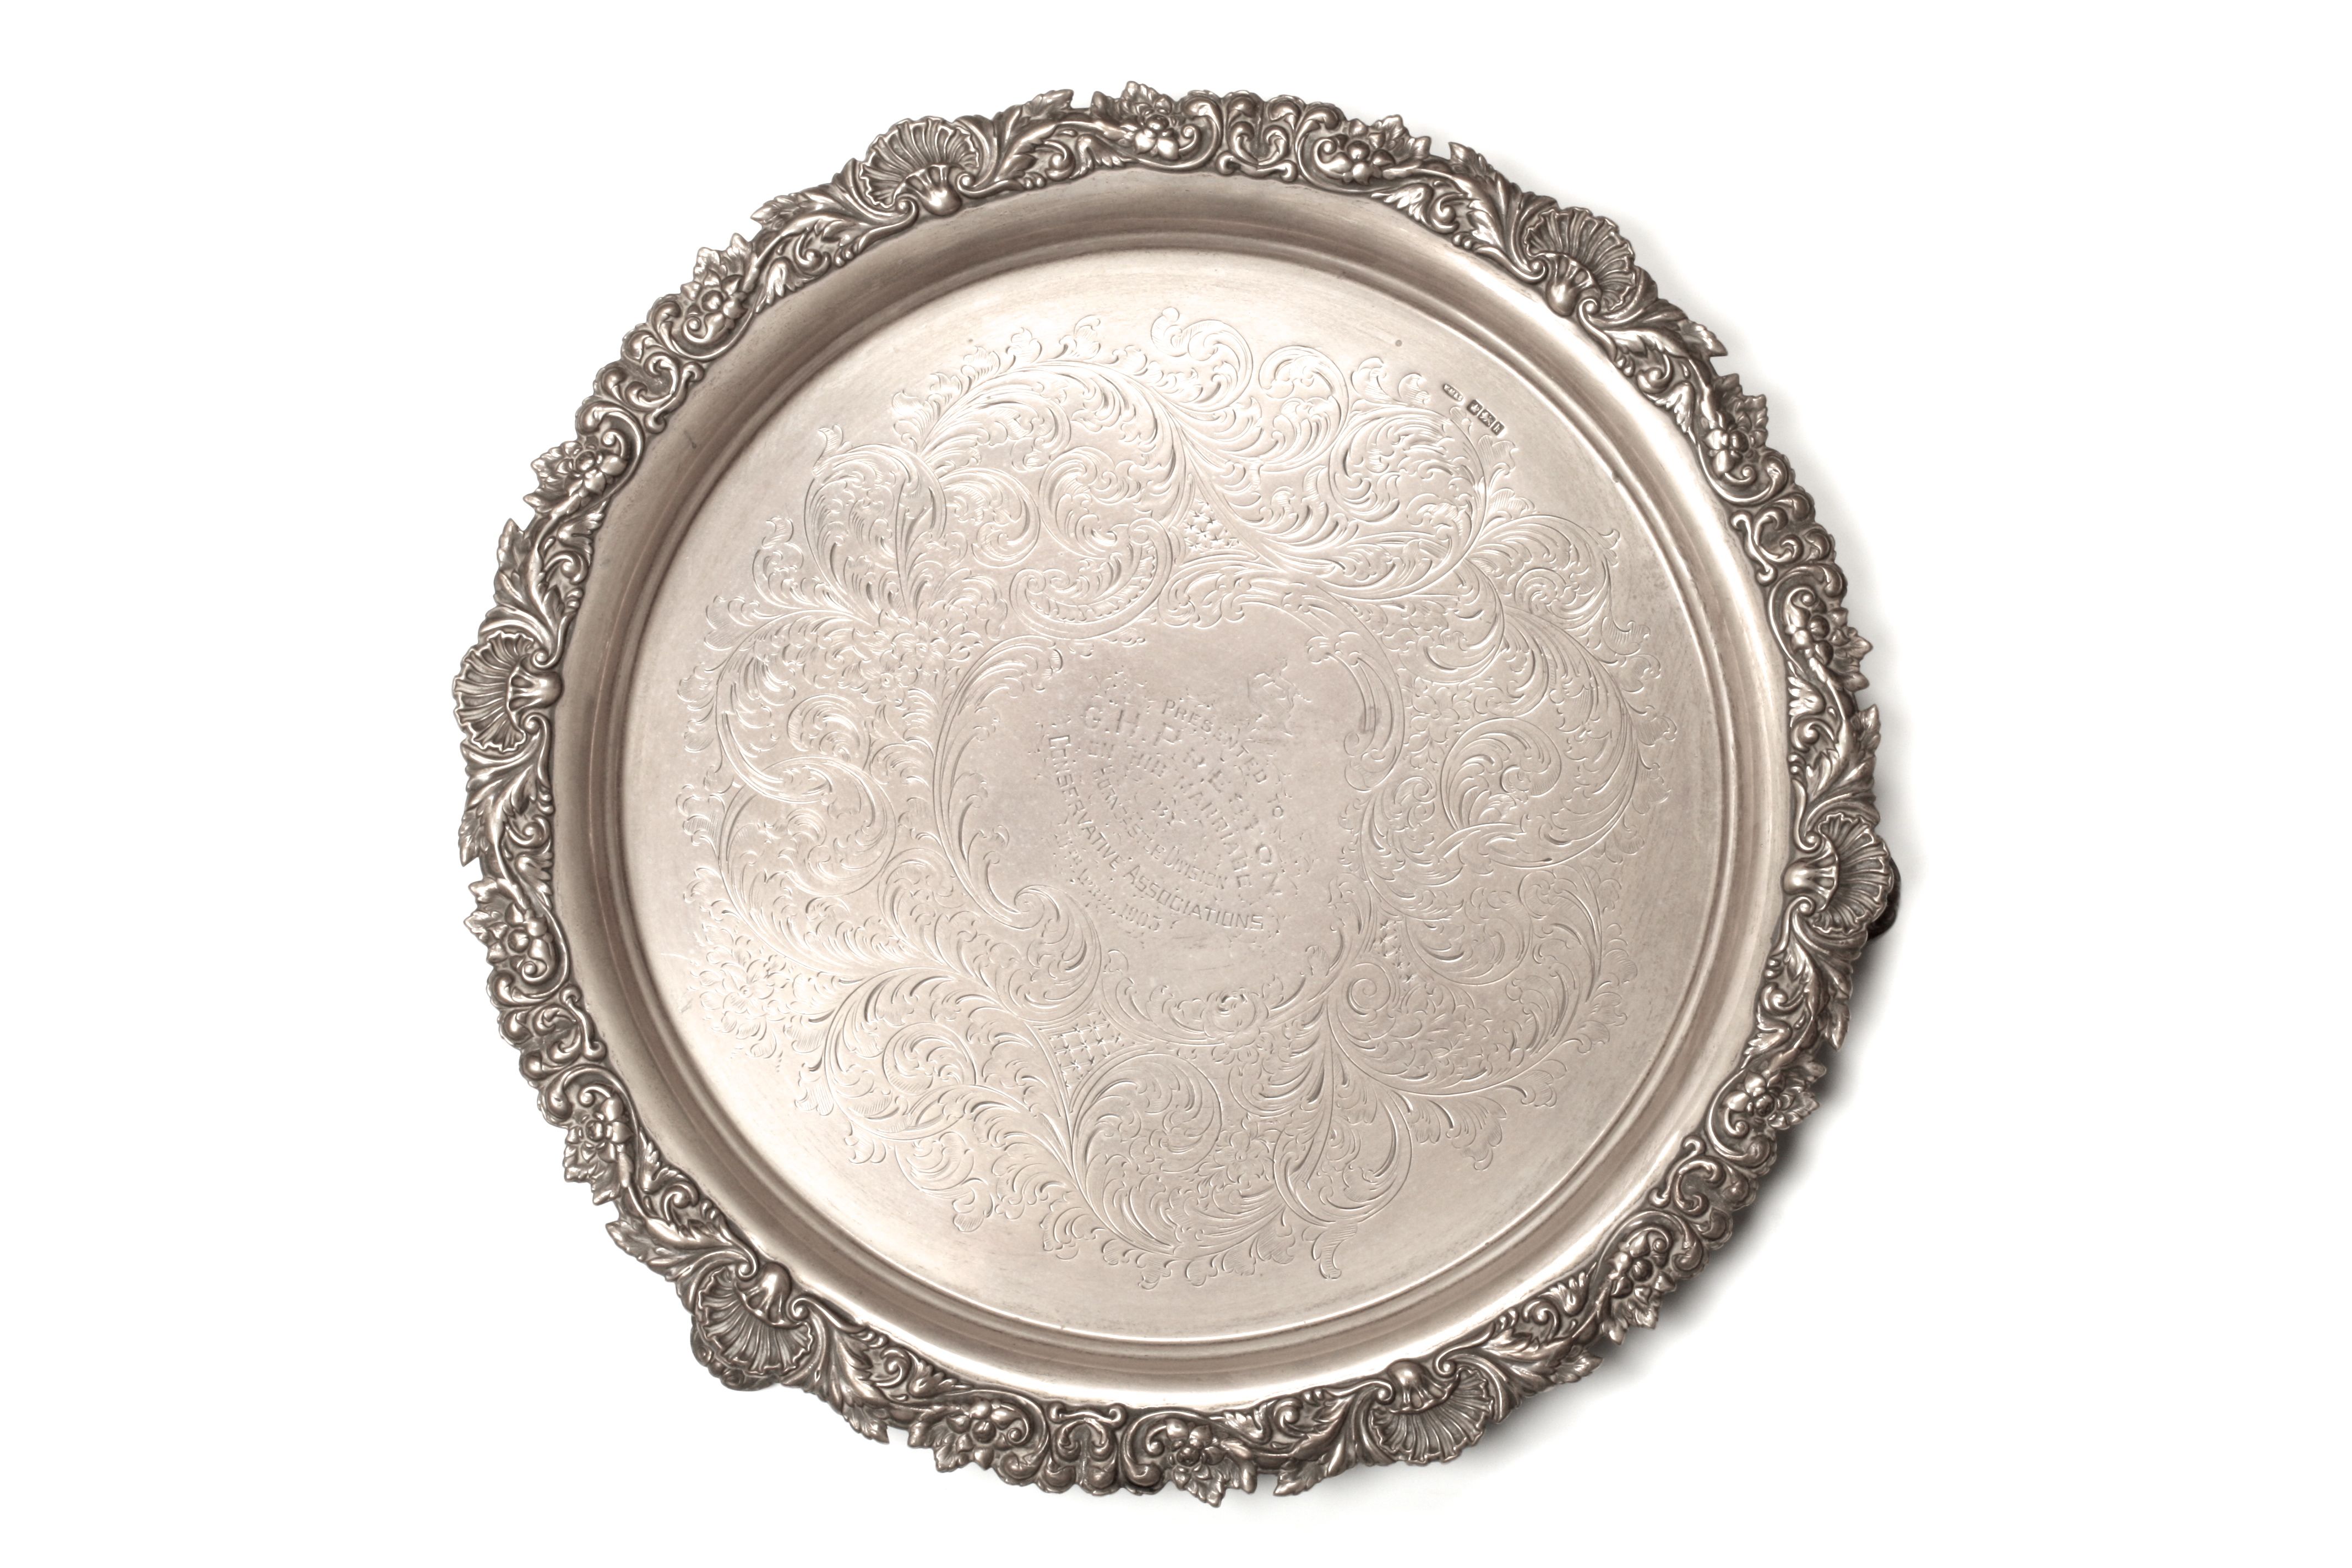 An Edwardian silver salver with flower embossed rim, hallmarked Sheffield 1902, the centre engraved